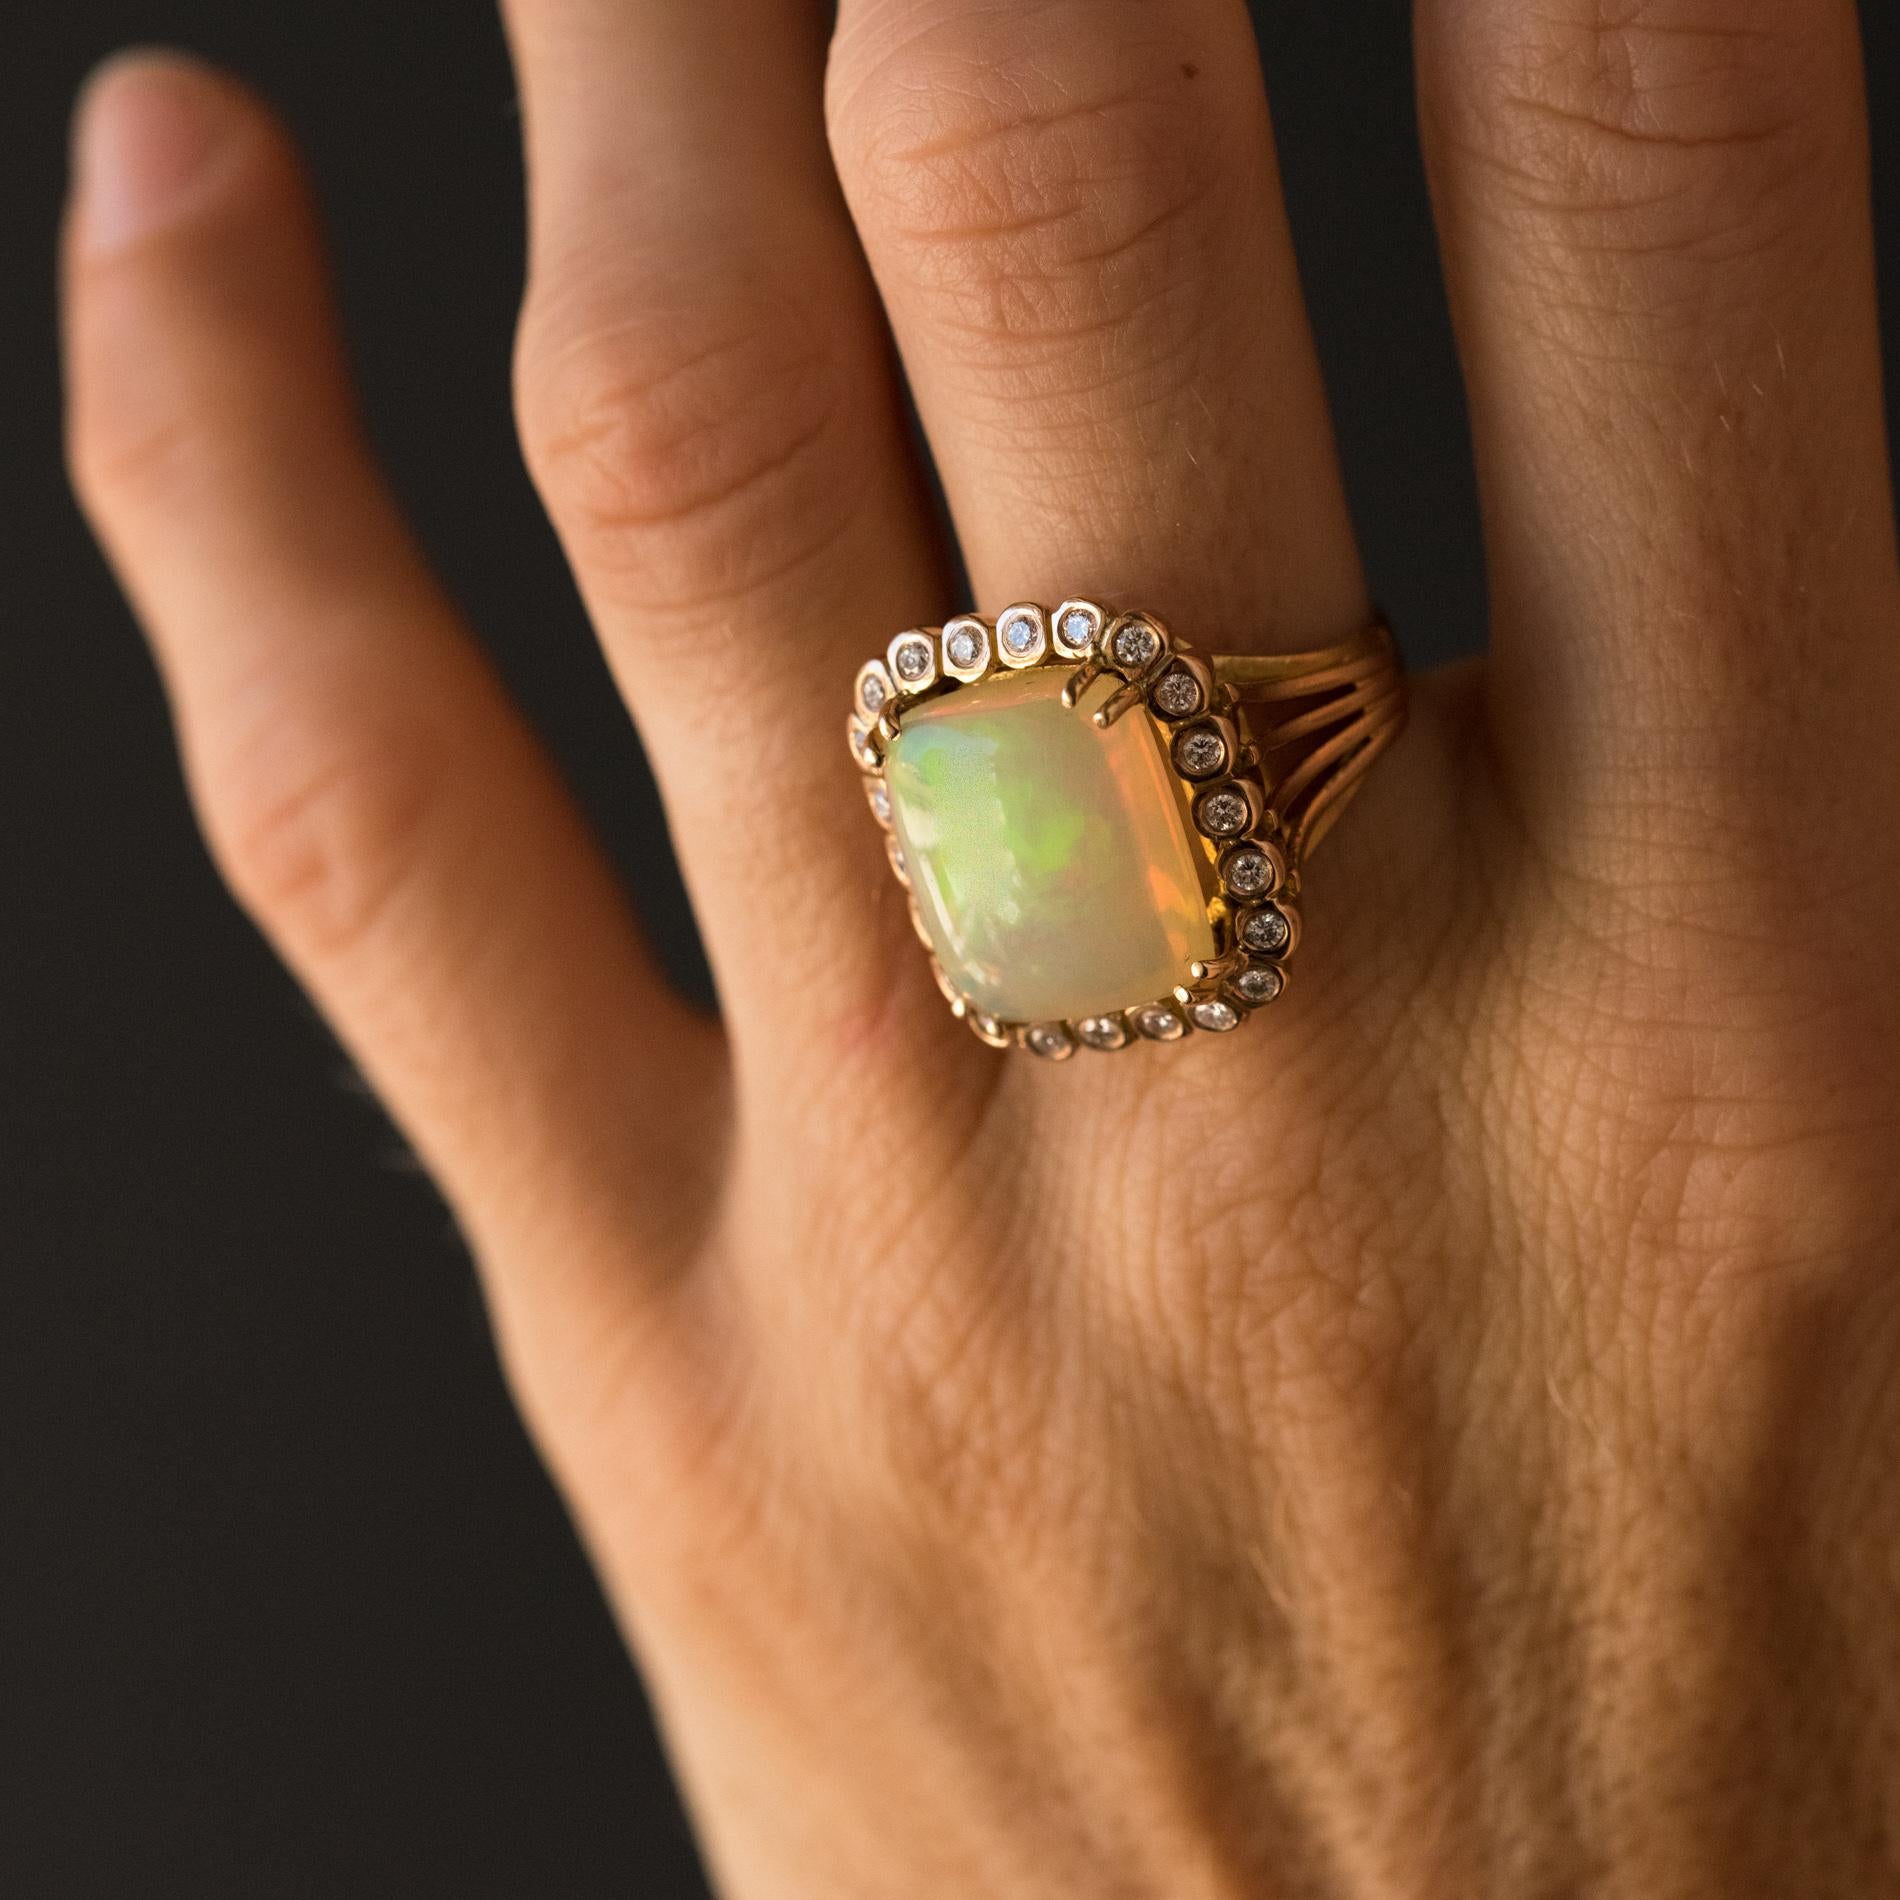 Ring in 18k rose gold.
The centrepiece, a double claw set rectangular opal cabochon, is surrounded by 22 brilliant cut diamonds. The head of the ring is perforated and the shoulders are formed of 4 golden threads that come together to form the base.